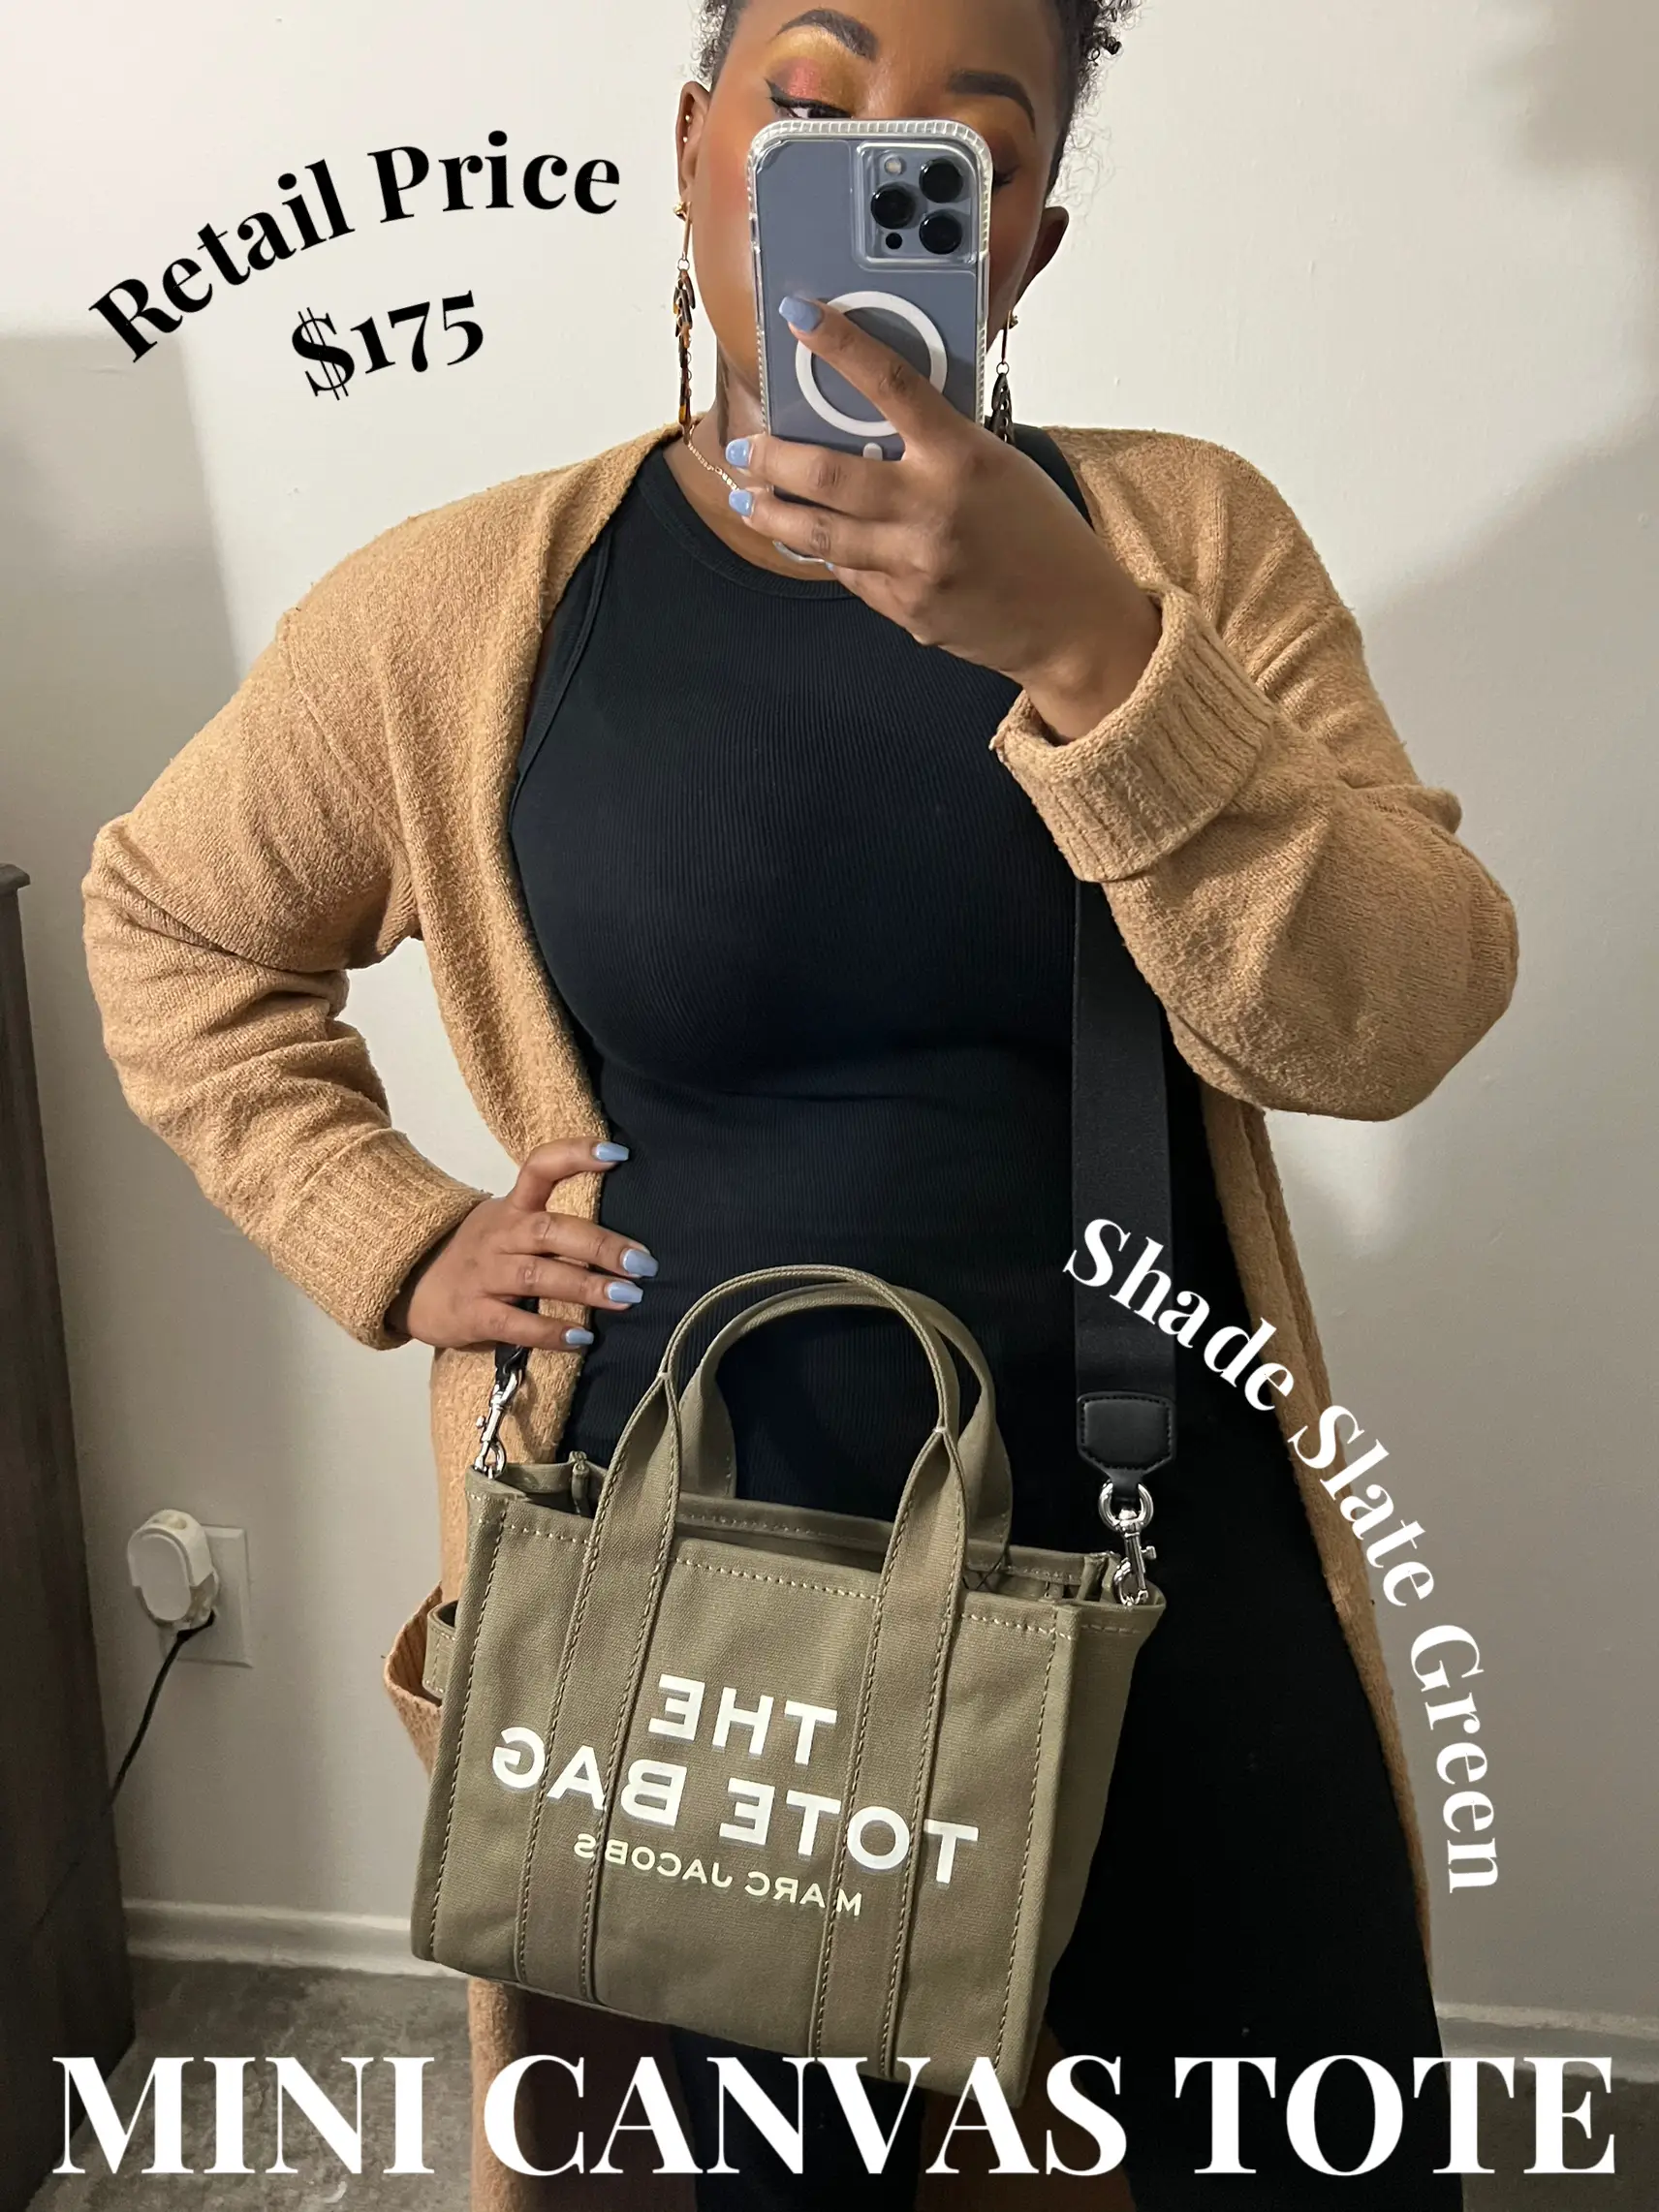 Reviewing 3 Sizes of the Marc Jacobs Tote Bag